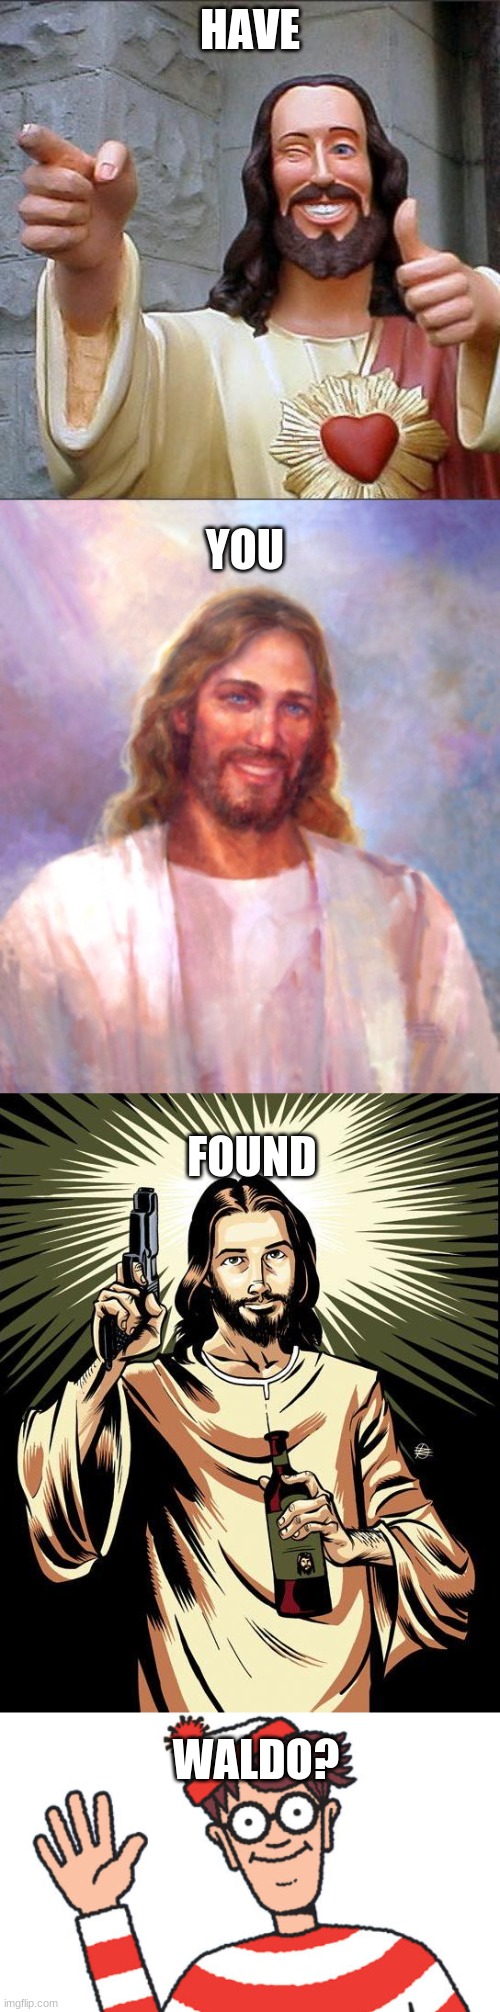 Have you? | HAVE; YOU; FOUND; WALDO? | image tagged in memes,buddy christ,smiling jesus,ghetto jesus,waldo | made w/ Imgflip meme maker